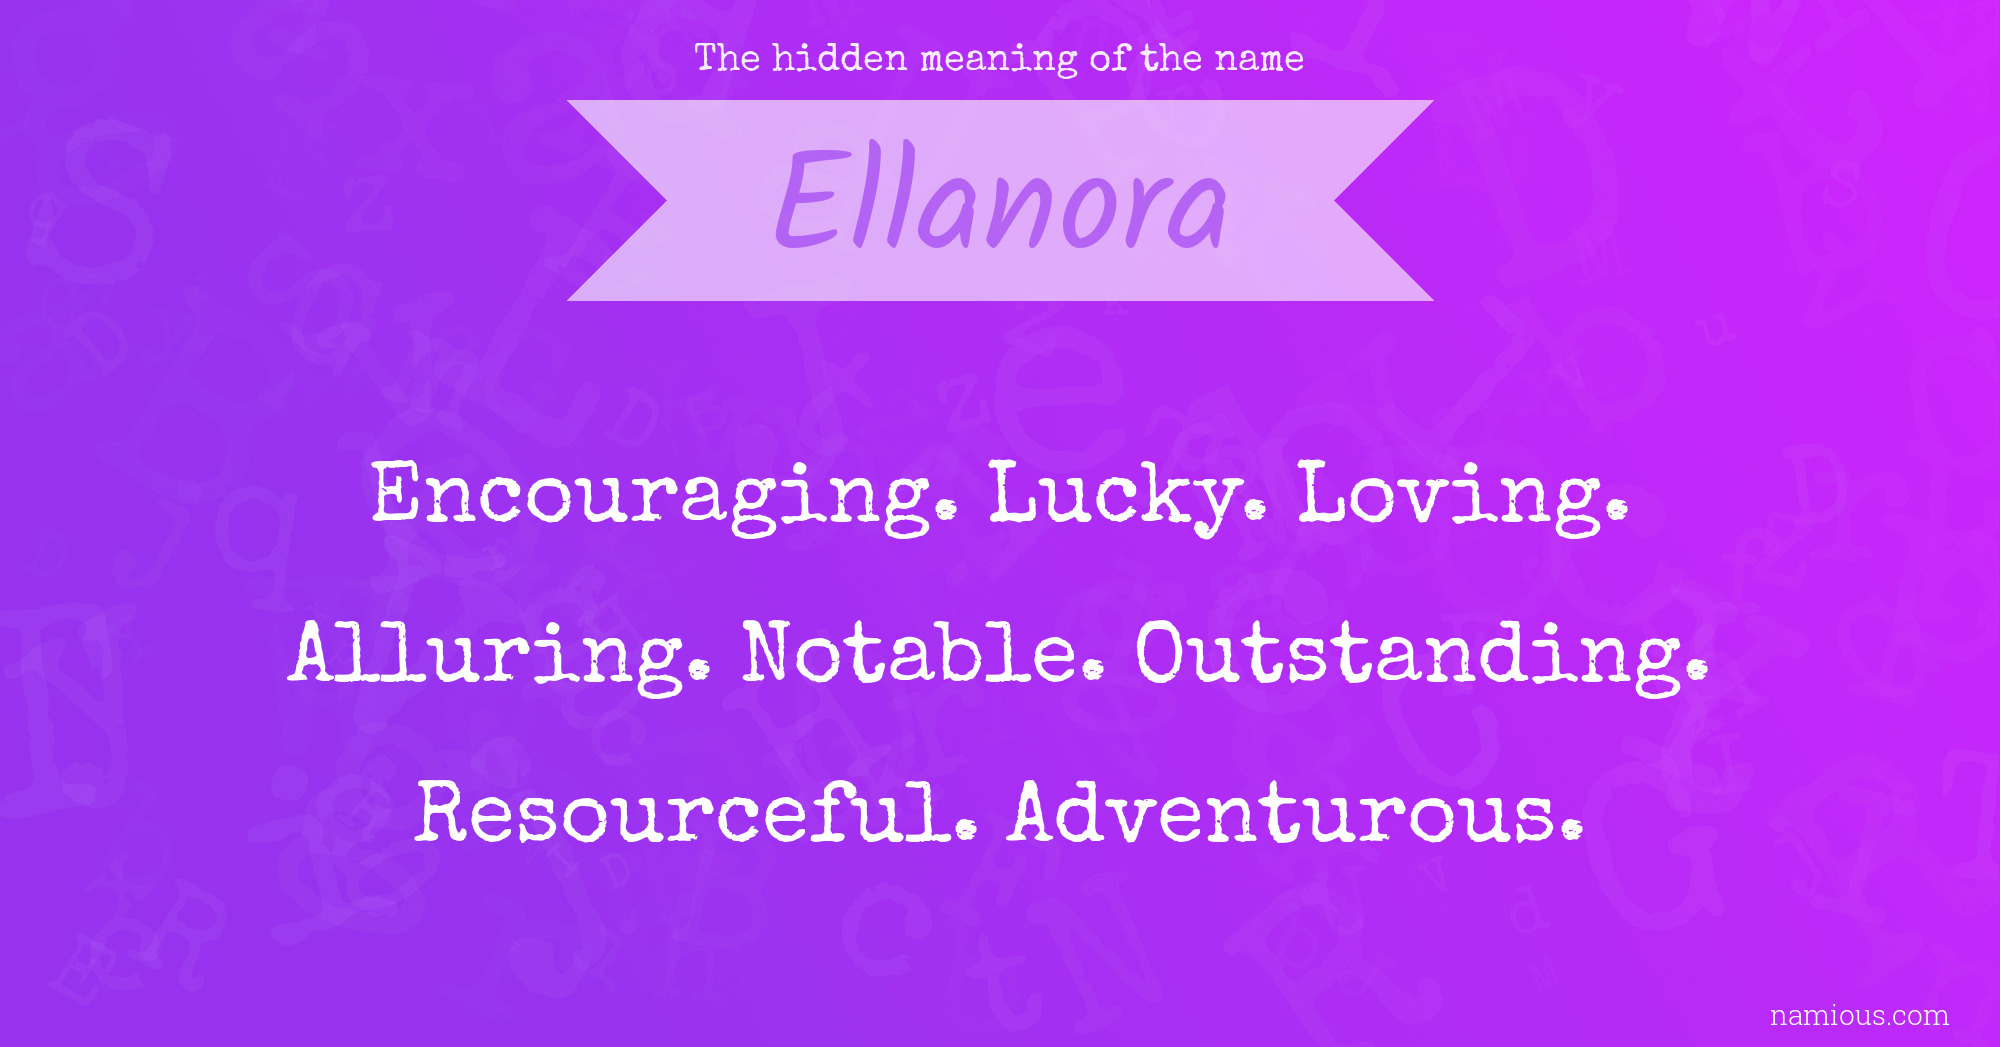 The hidden meaning of the name Ellanora